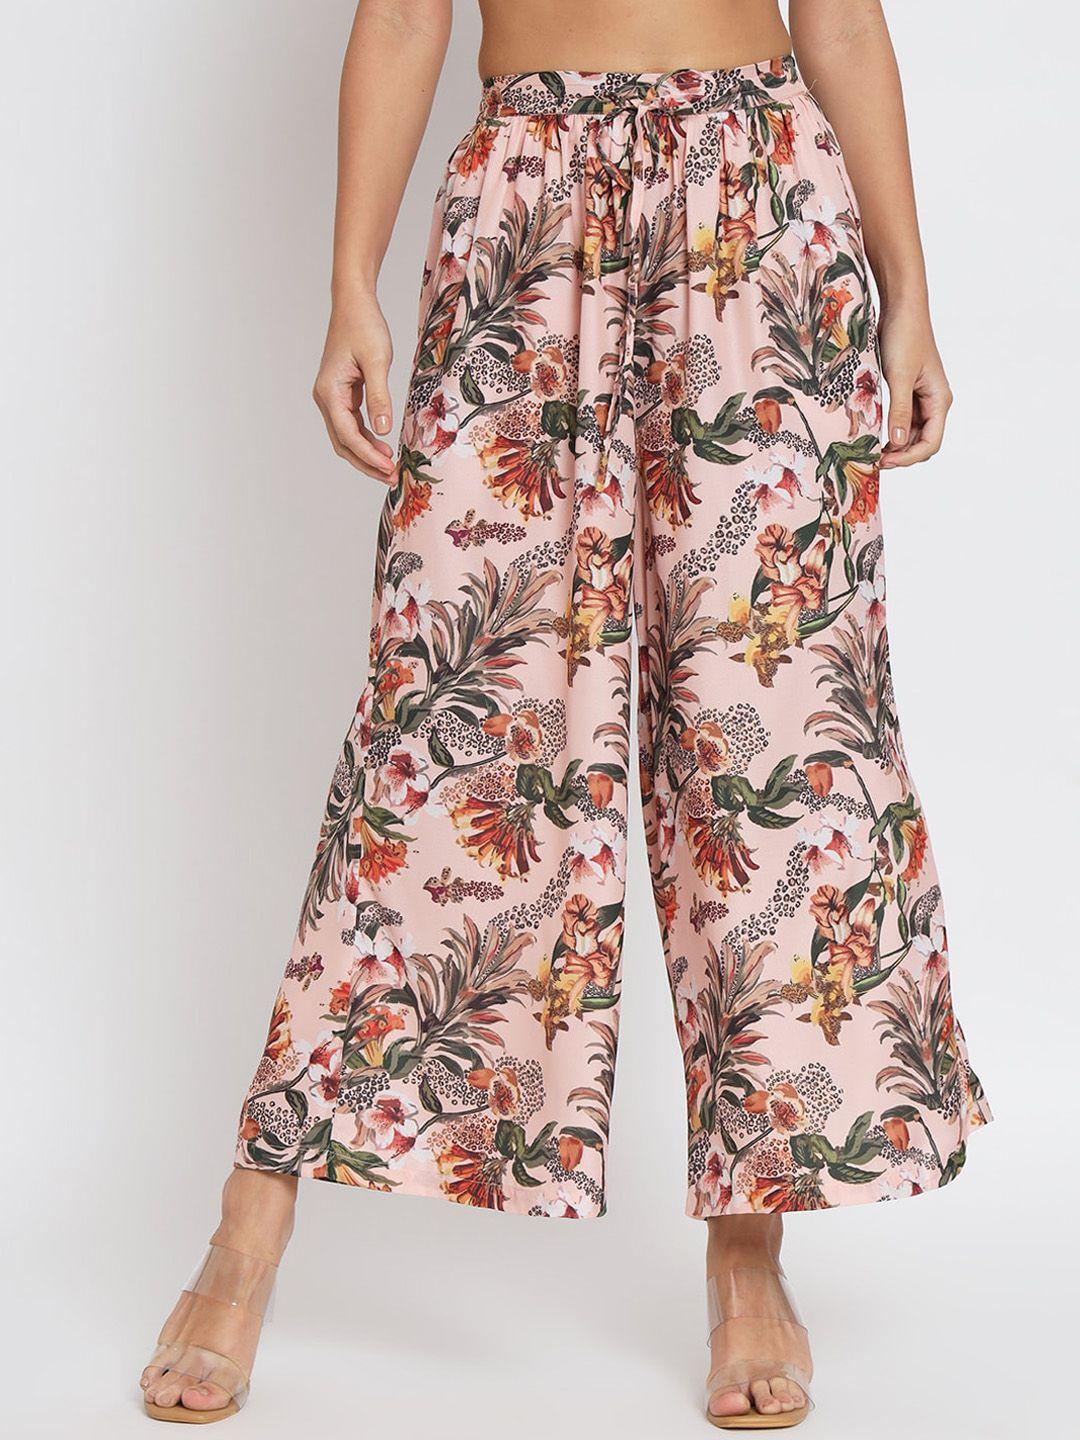 angloindu women peach-coloured floral printed loose fit culottes trousers